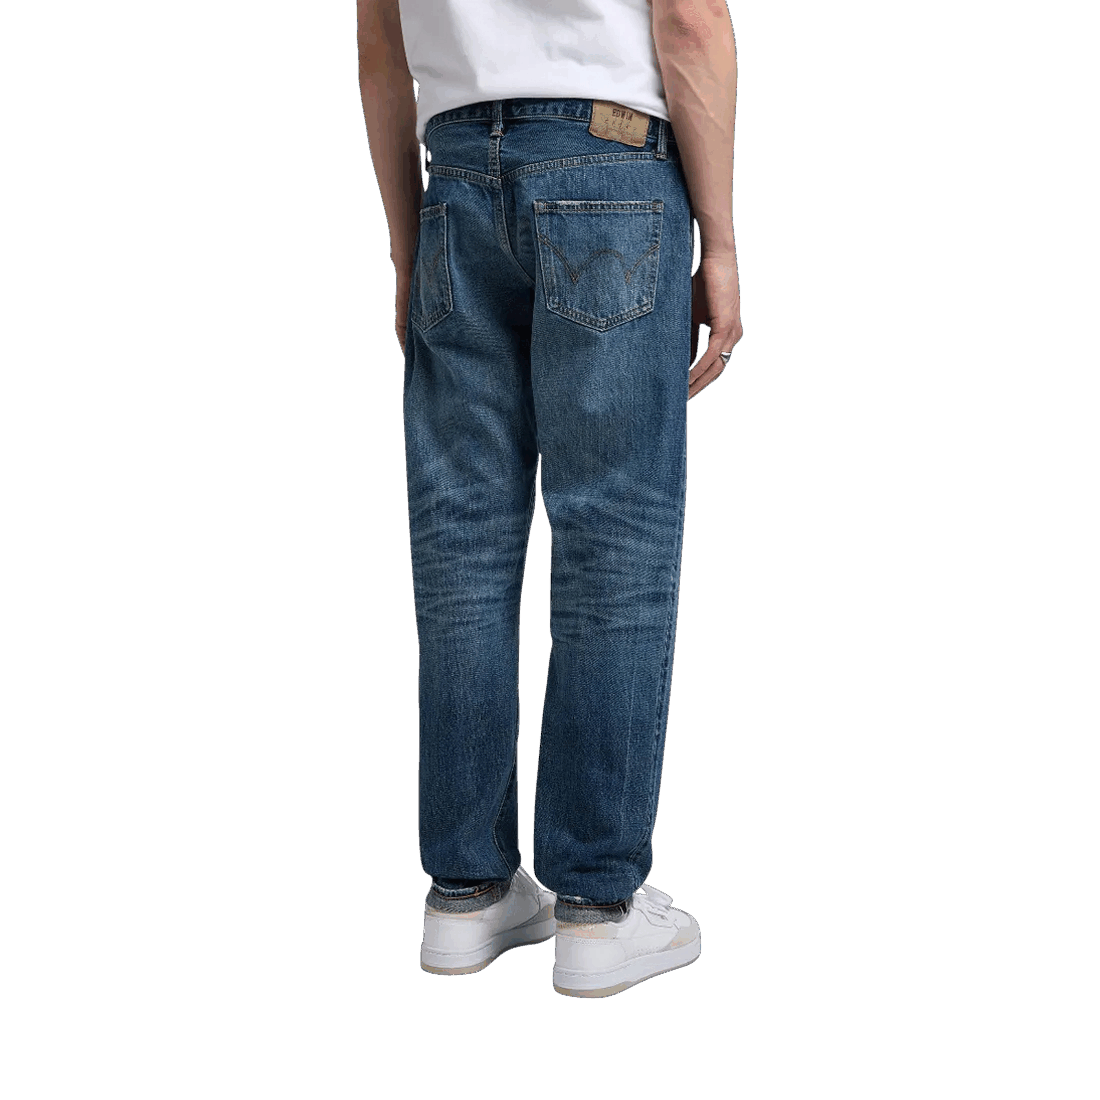 Edwin Regular Tapered (former ED 55) Rainbow Selvage - mid dark washed